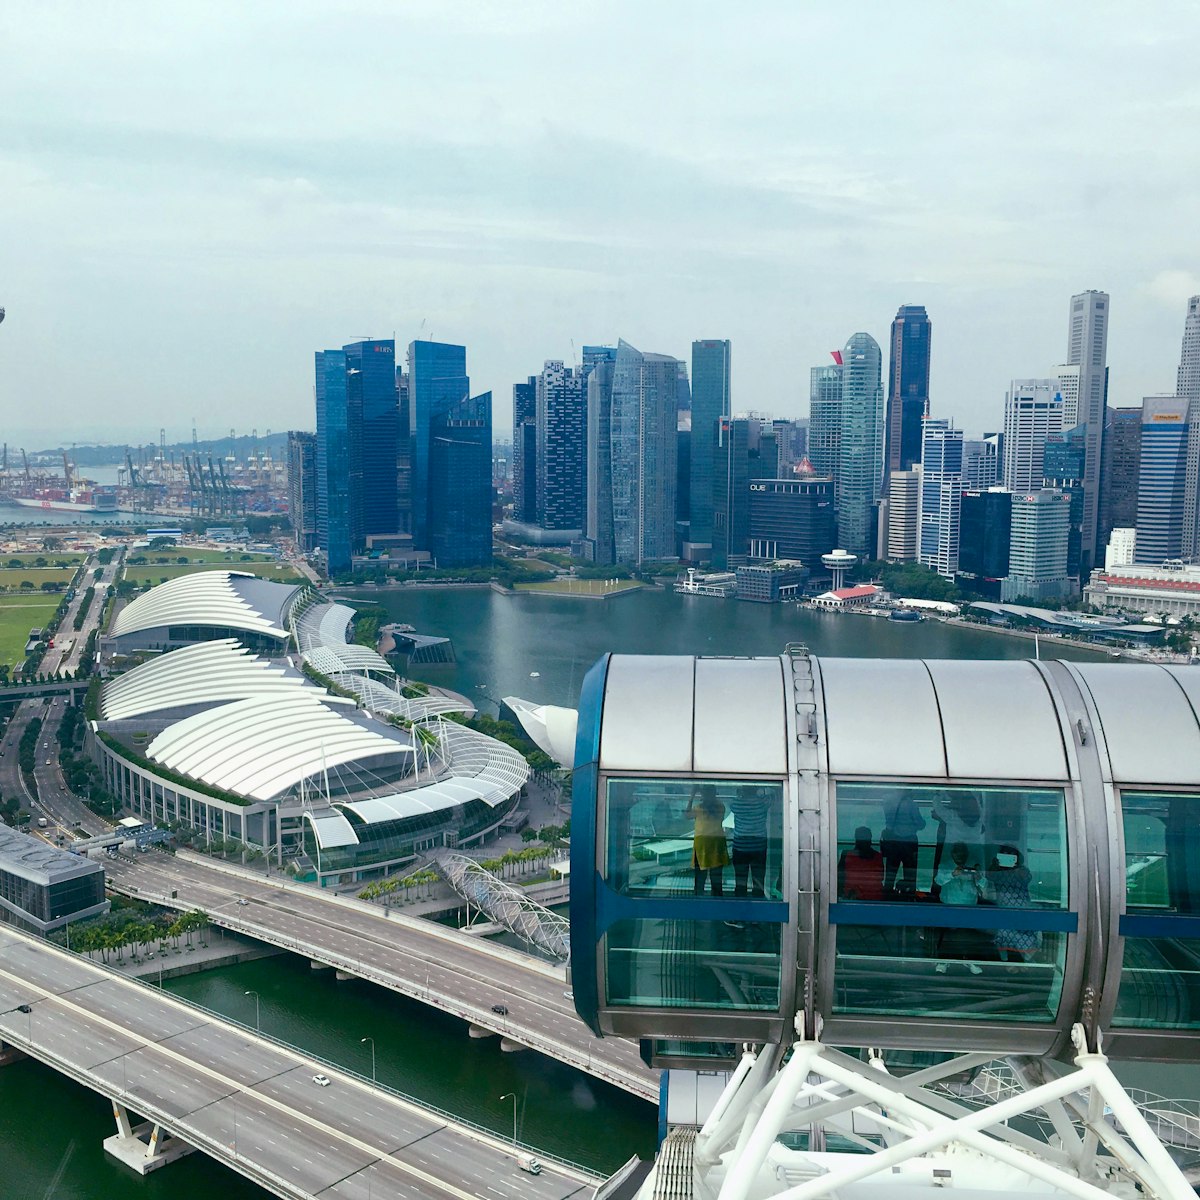 View from inside Singapore Flyer